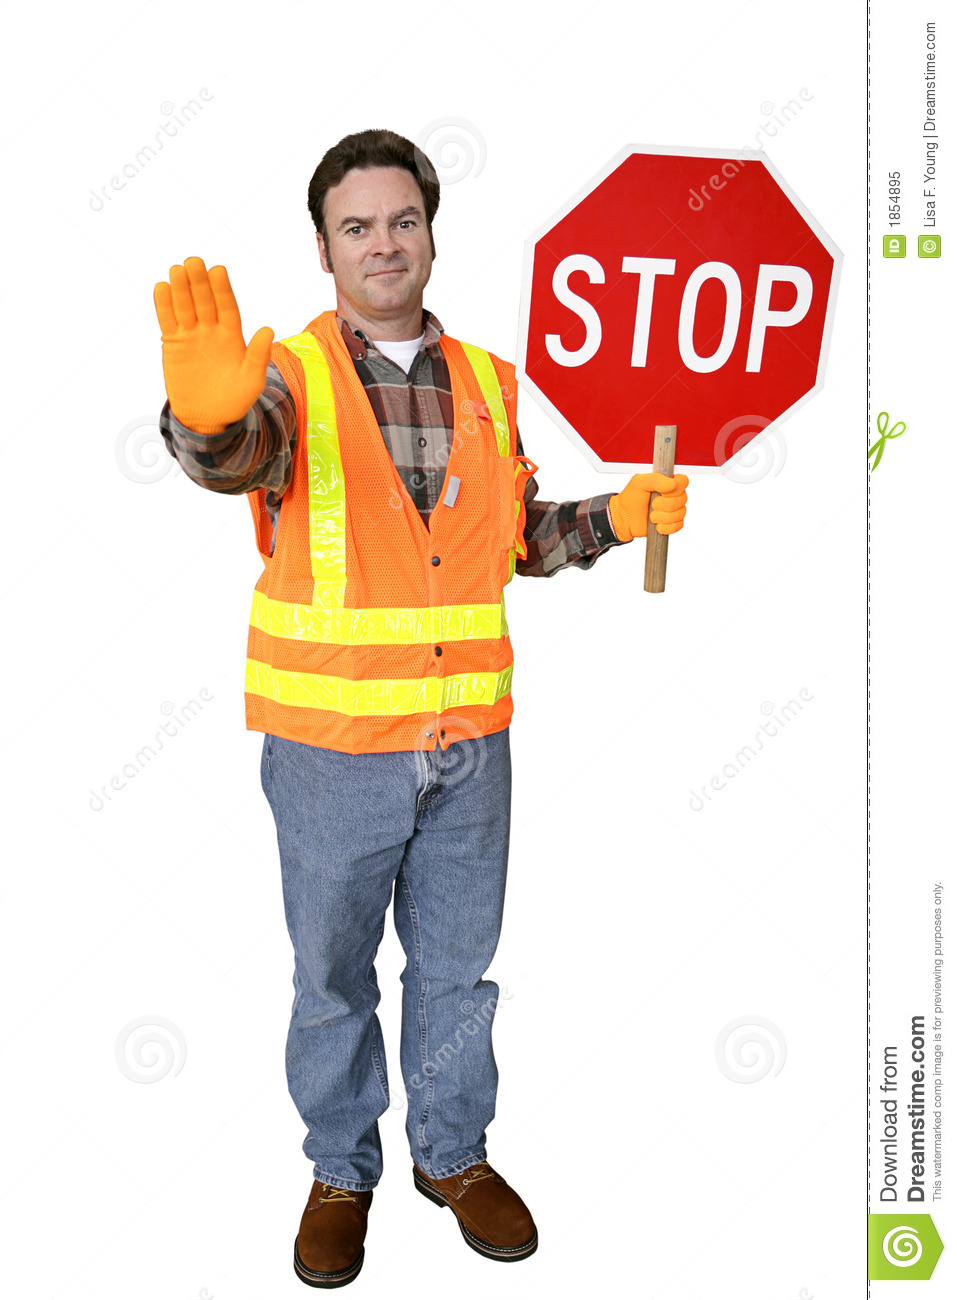 Crossing Guard Full Body Isolated Royalty Free Stock Photo   Image